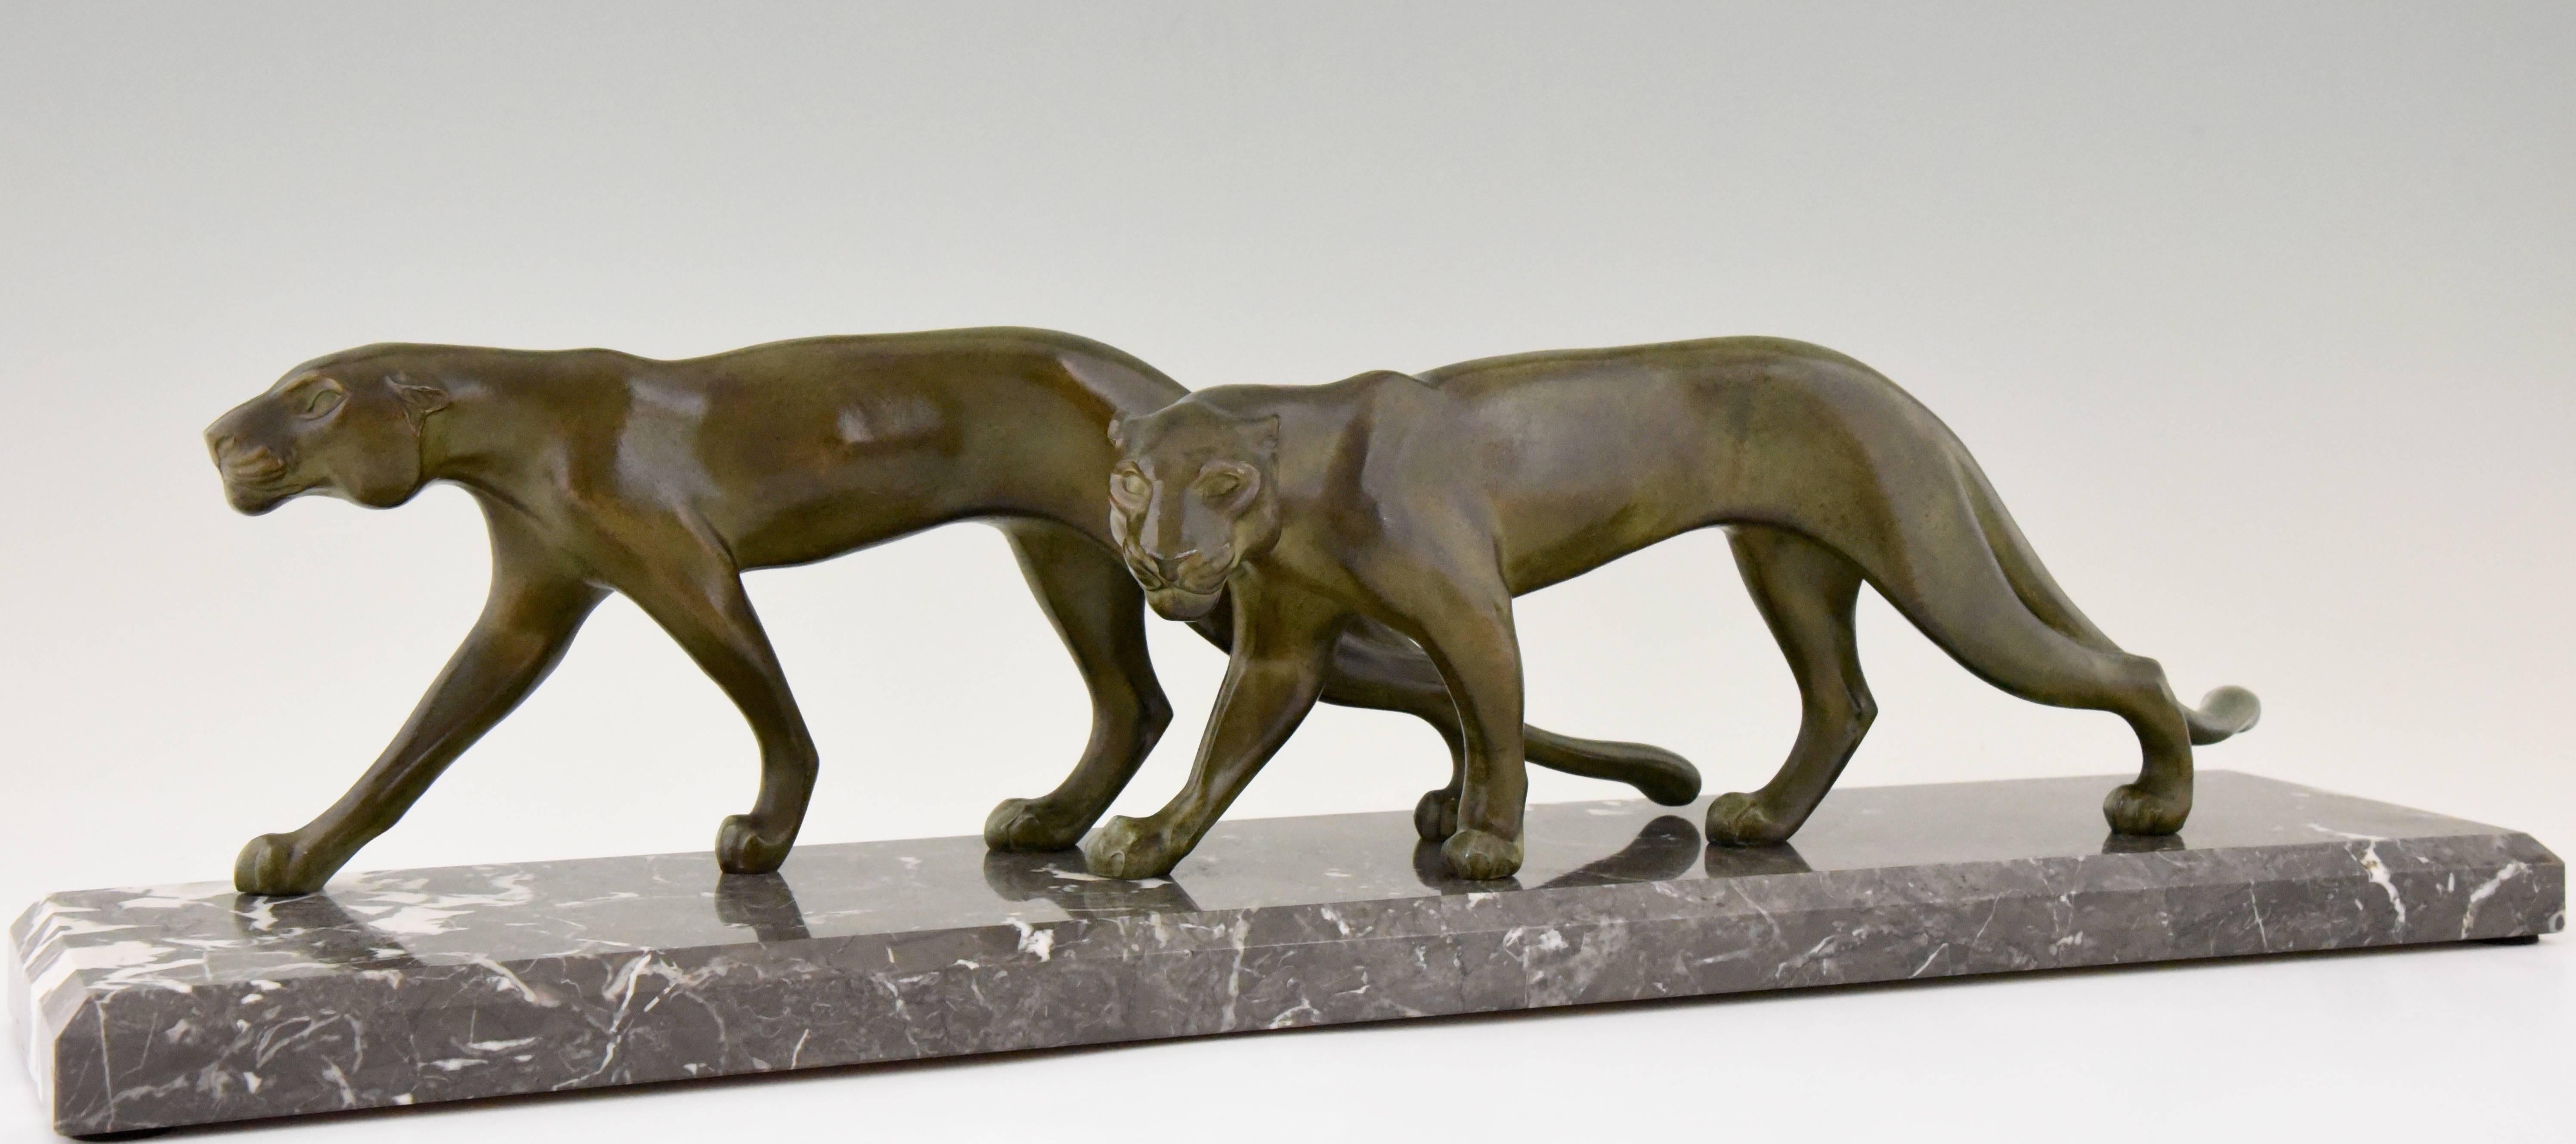 Stylish Art Deco sculpture of two walking panthers by the French artist M. Font.
Signed on the base. 

Style: Art Deco
Date: 1930
Material: Patinated art metal. Marble base.
Origin: France
Size: H 18 cm x L 70 cm. x W 14.5 cm.
H 7.1 inch x L